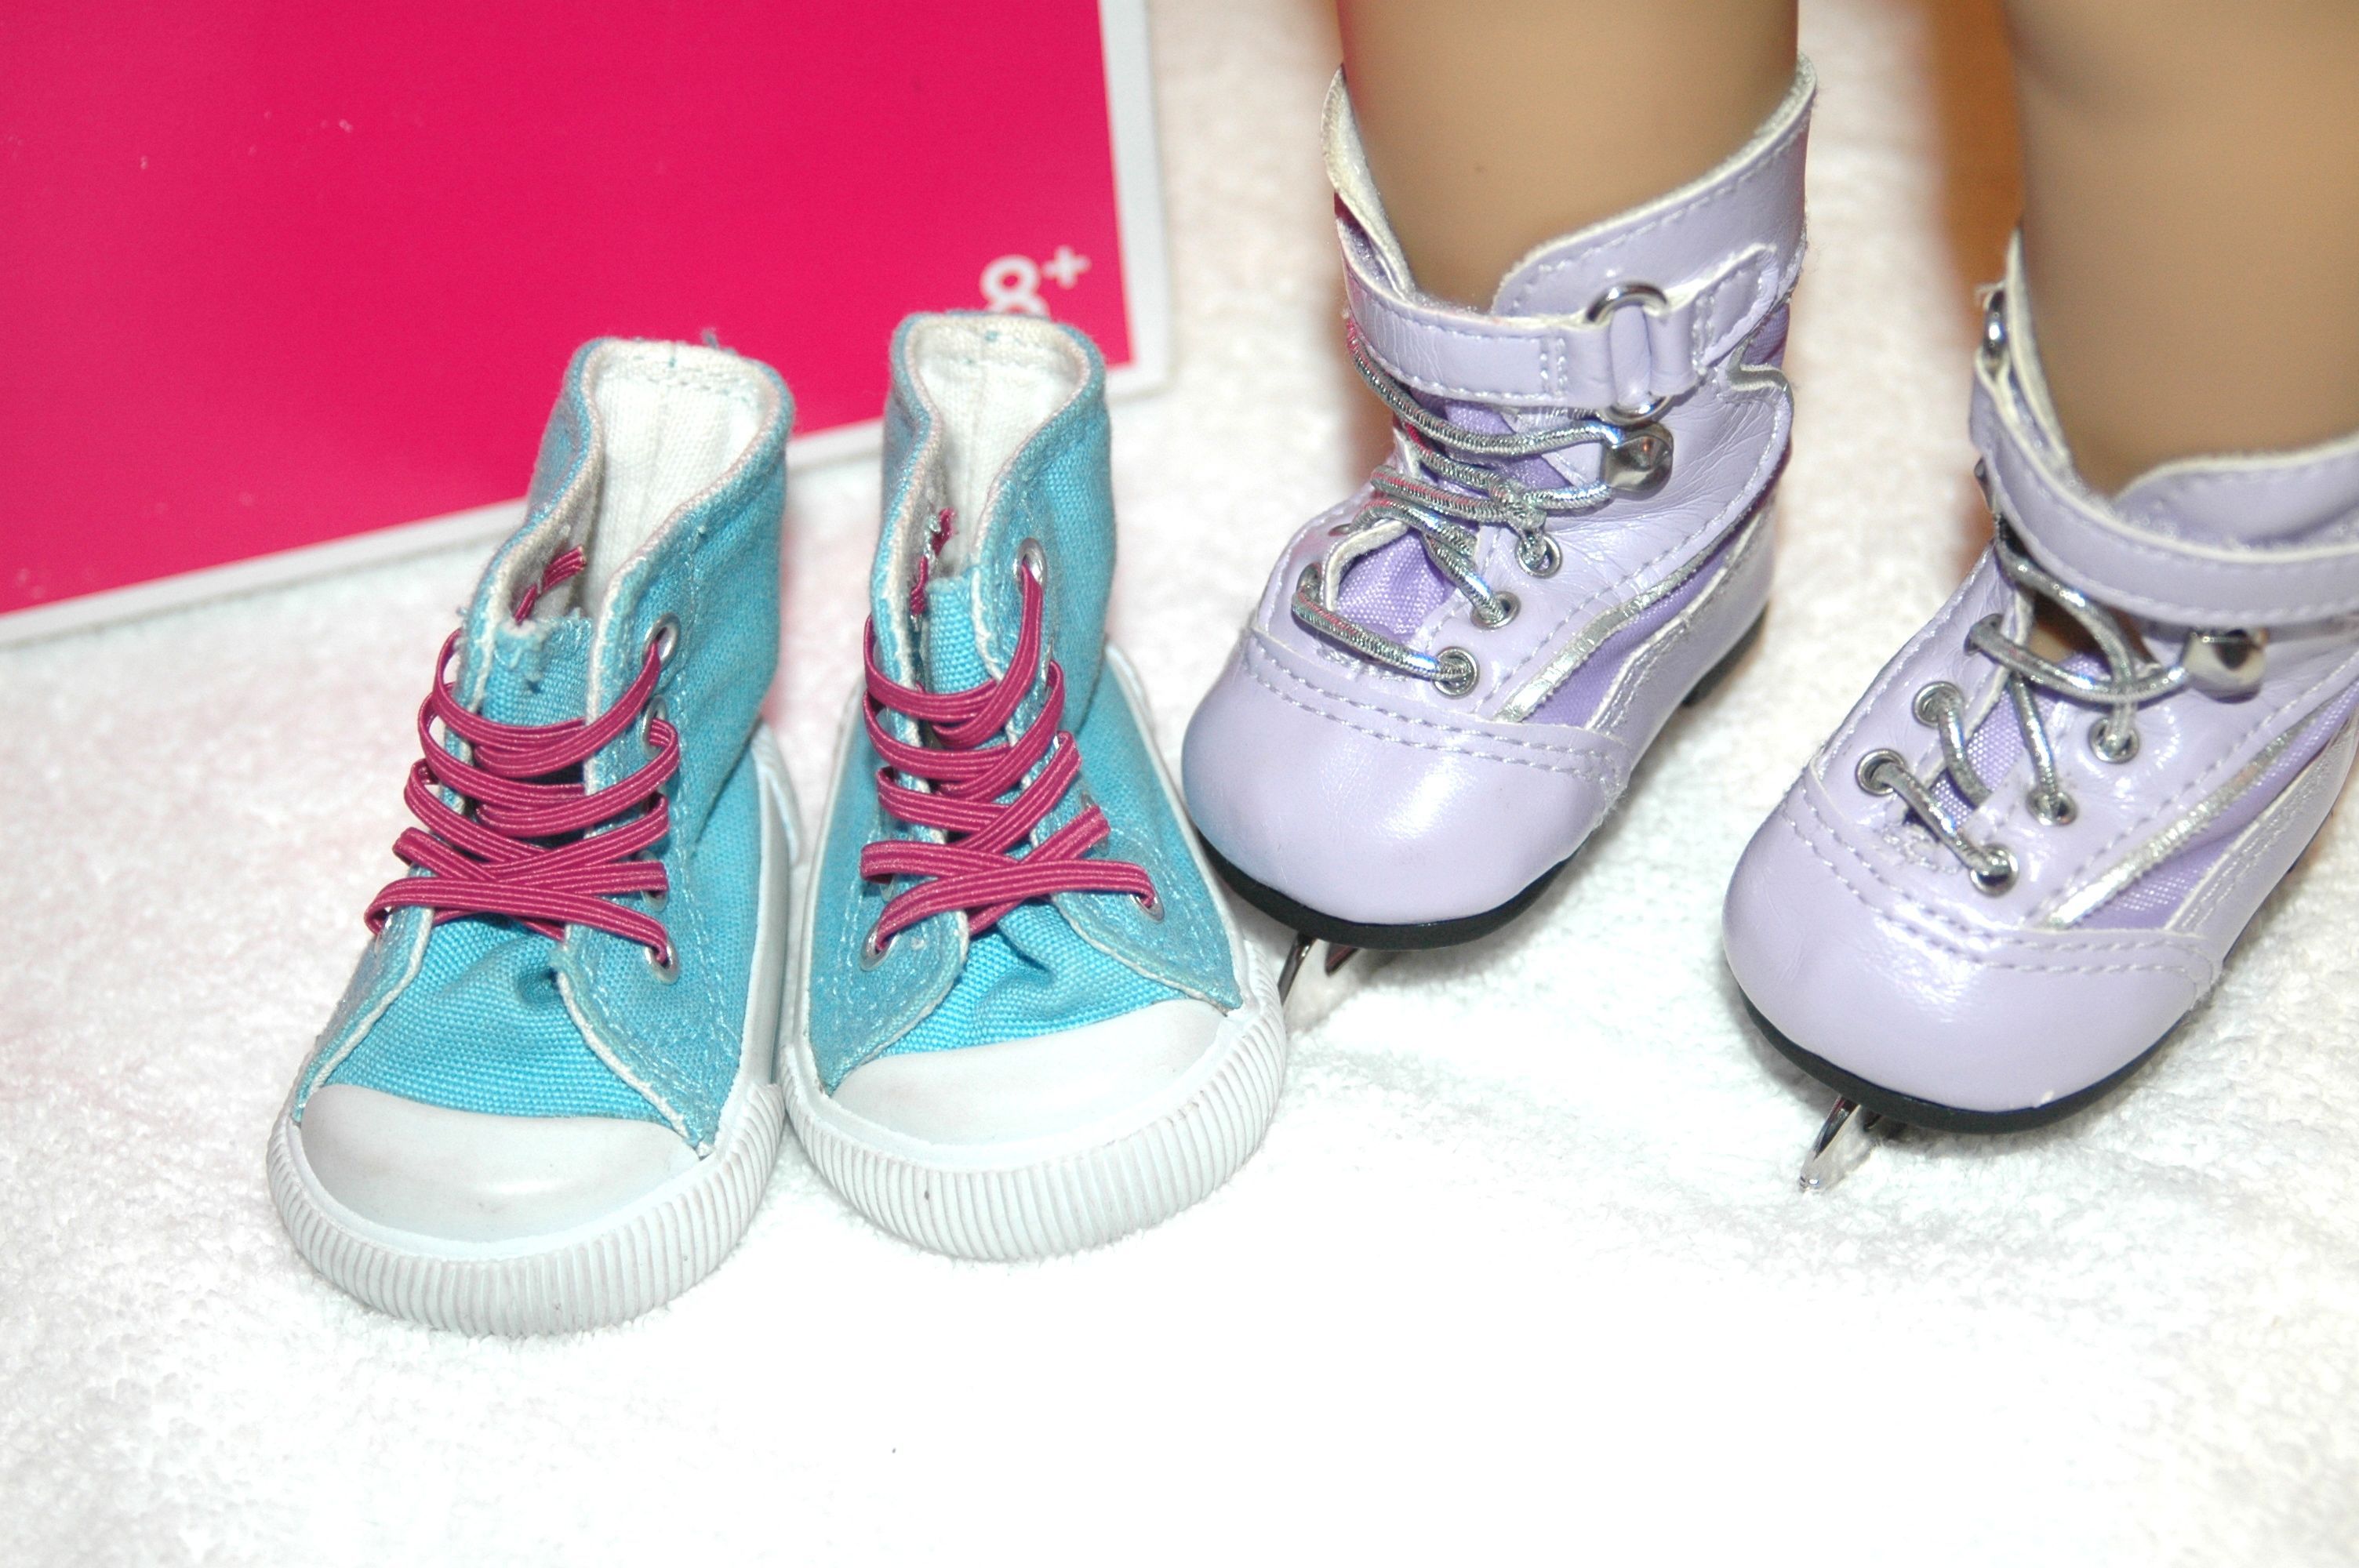 Mias Purple ice skates and Mias blue sneakers with pink laces 8